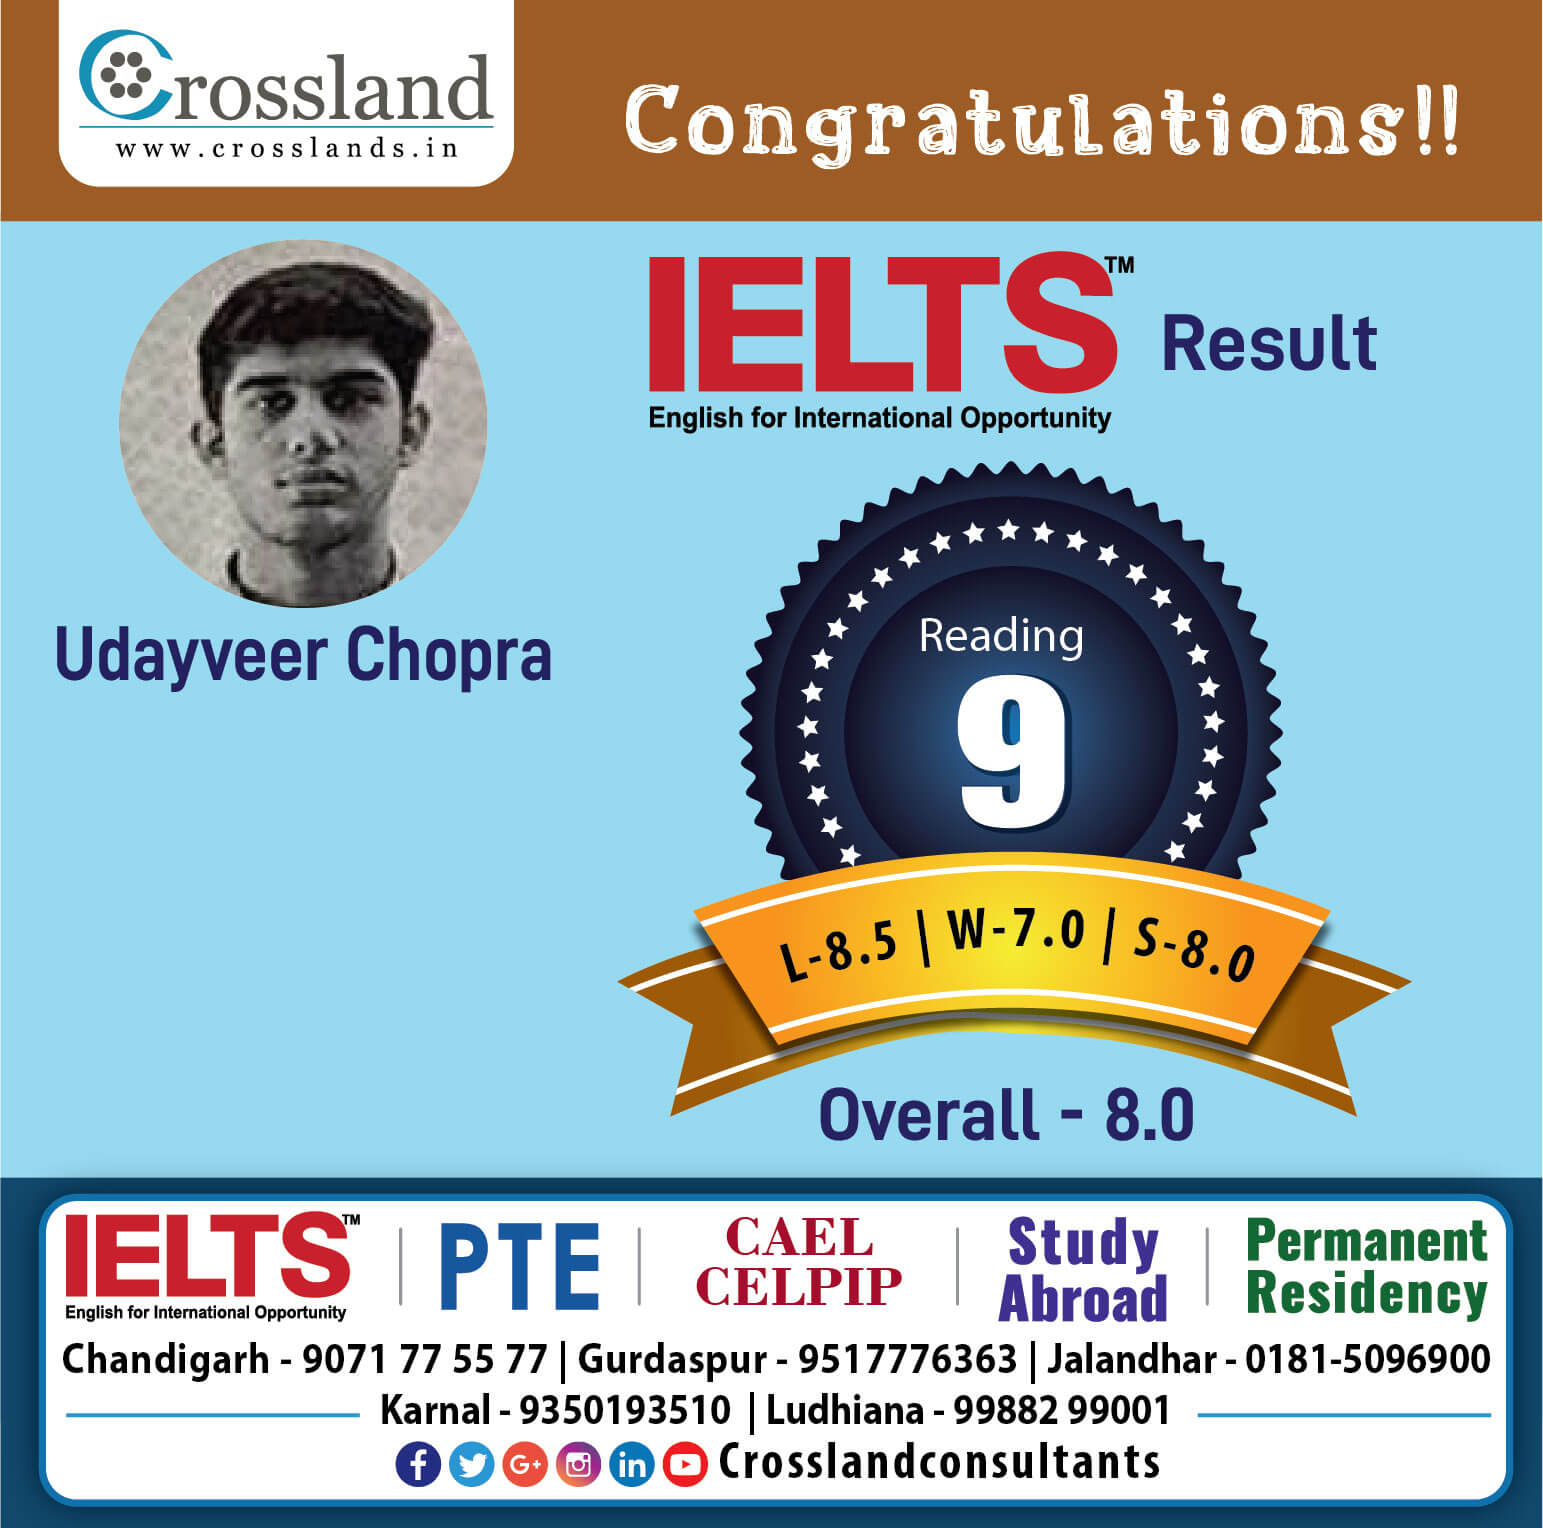  Training Centre for IELTS In Chandigarh